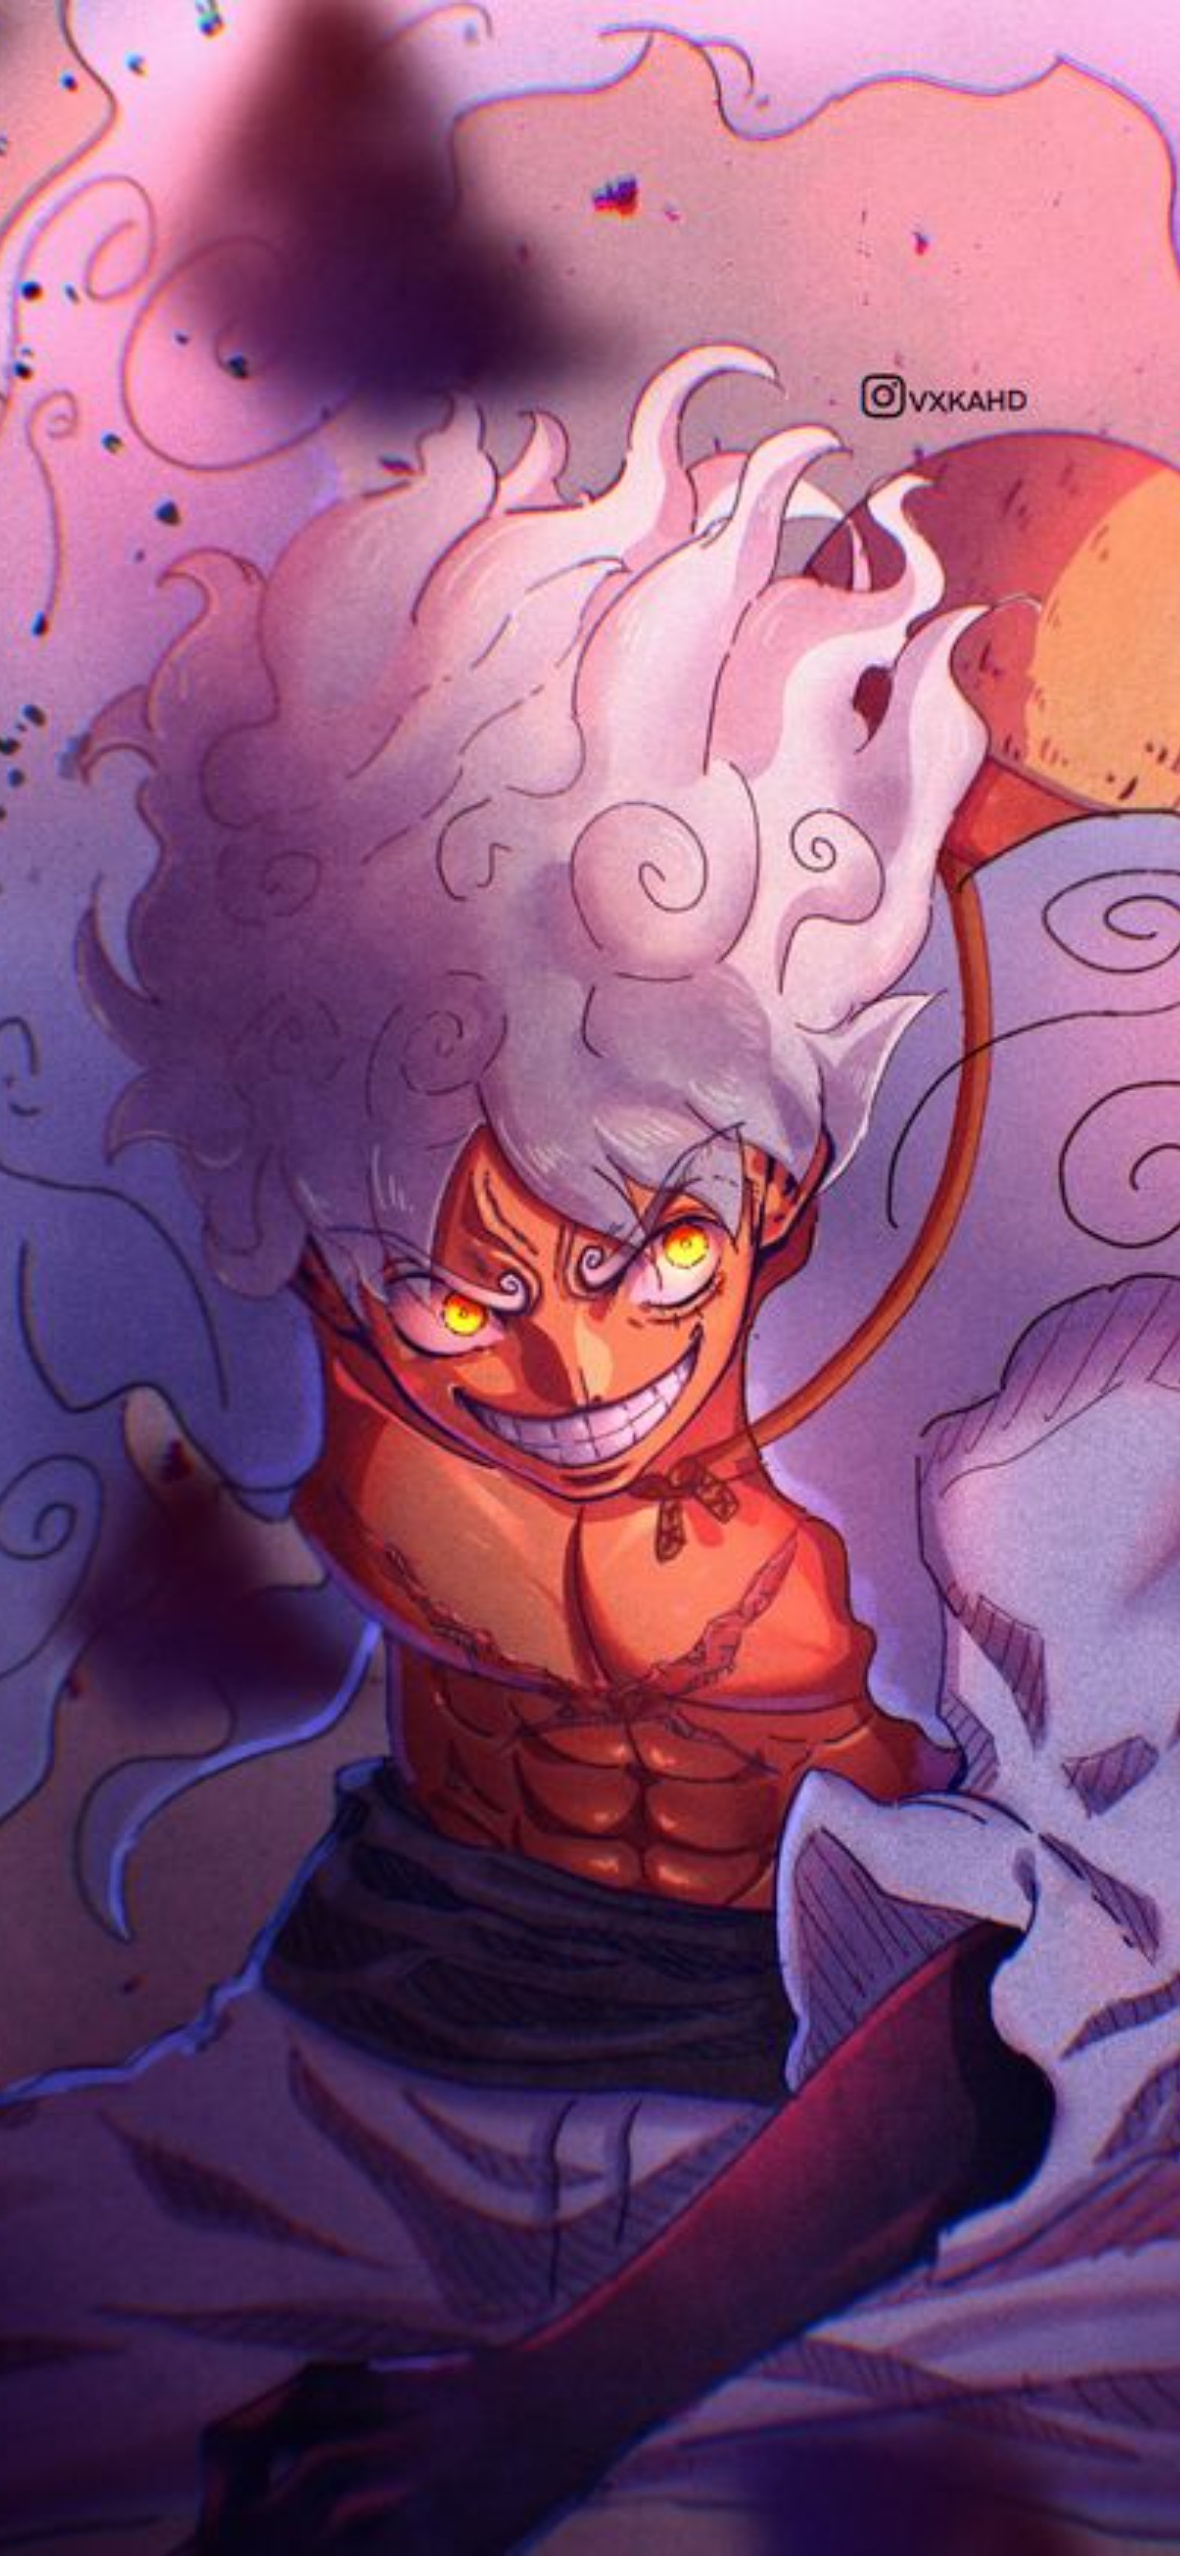 Best Luffy Gear 5 Wallpapers for Phone - ForMyAnime